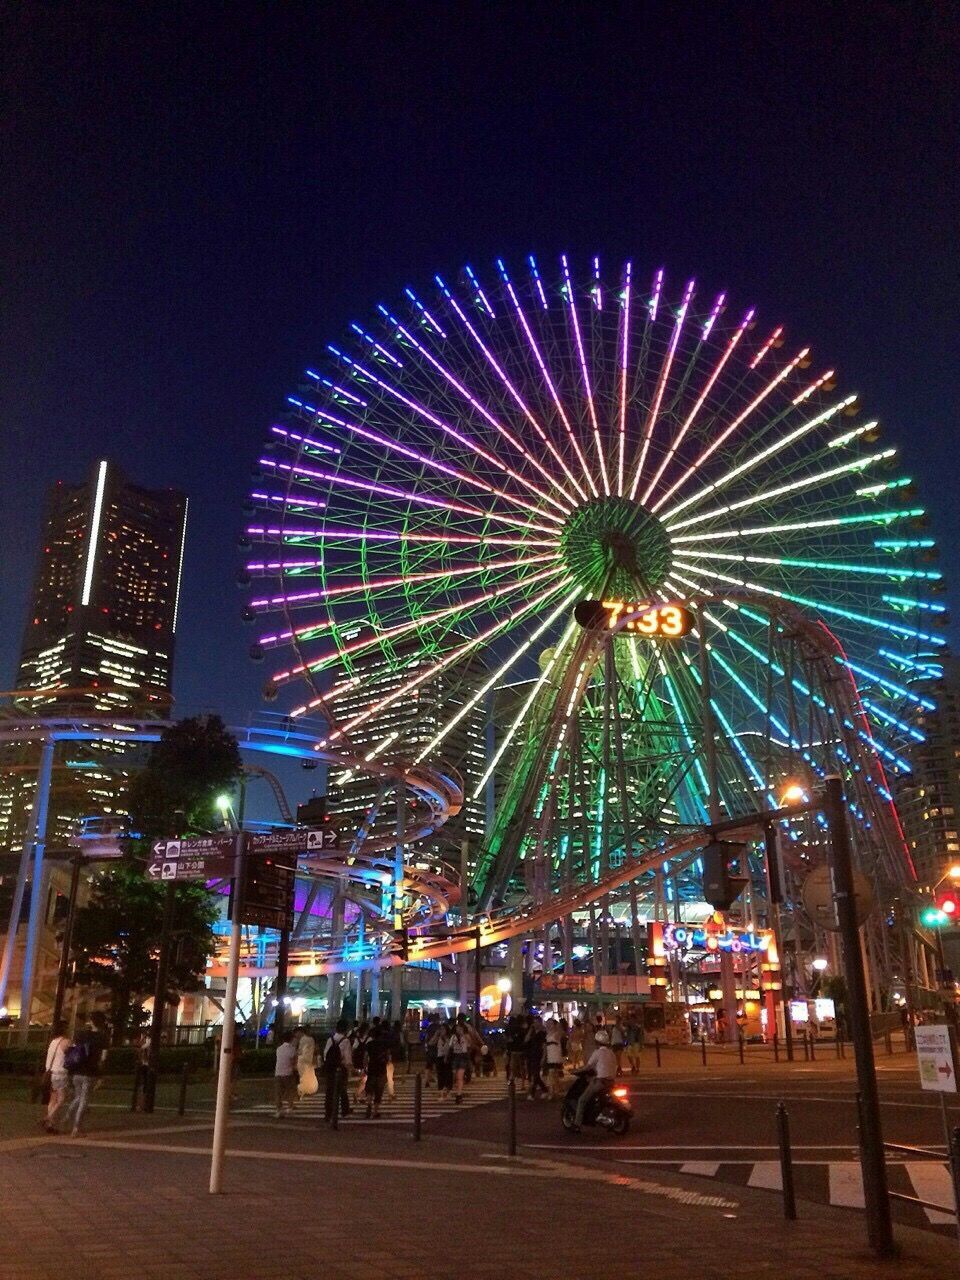 LOW ANGLE VIEW OF ILLUMINATED FERRIS WHEEL IN CITY